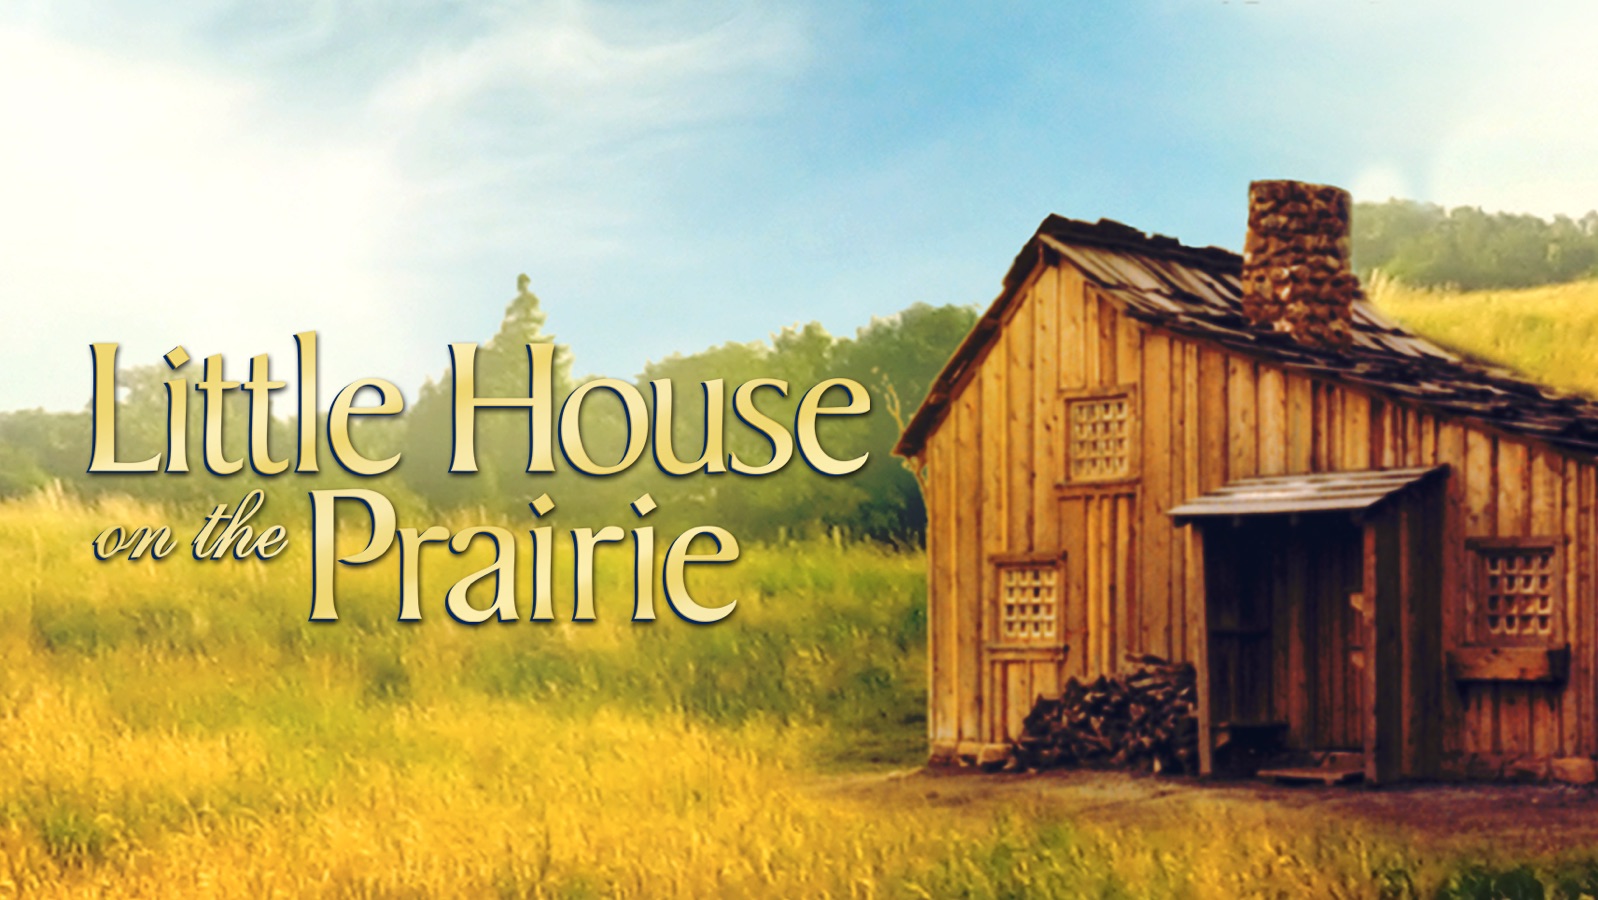 The little House. Big House and little House. Let's Play little House. On the Prairie. My little house